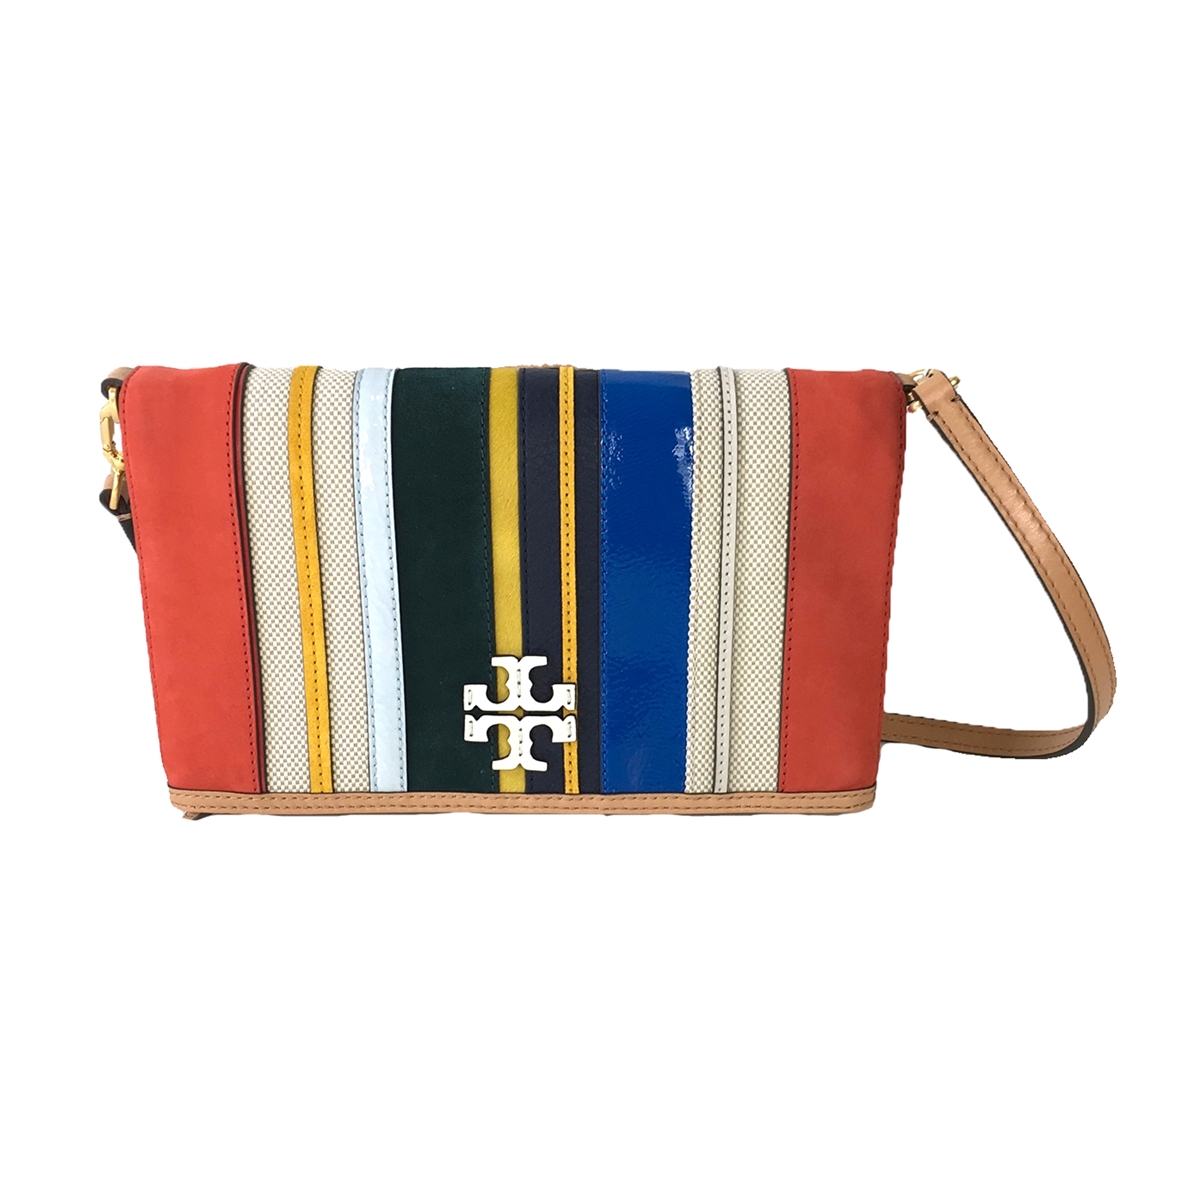 Tory Burch McGraw Floral Flap Fold Over Crossbody Leather Sling Bag